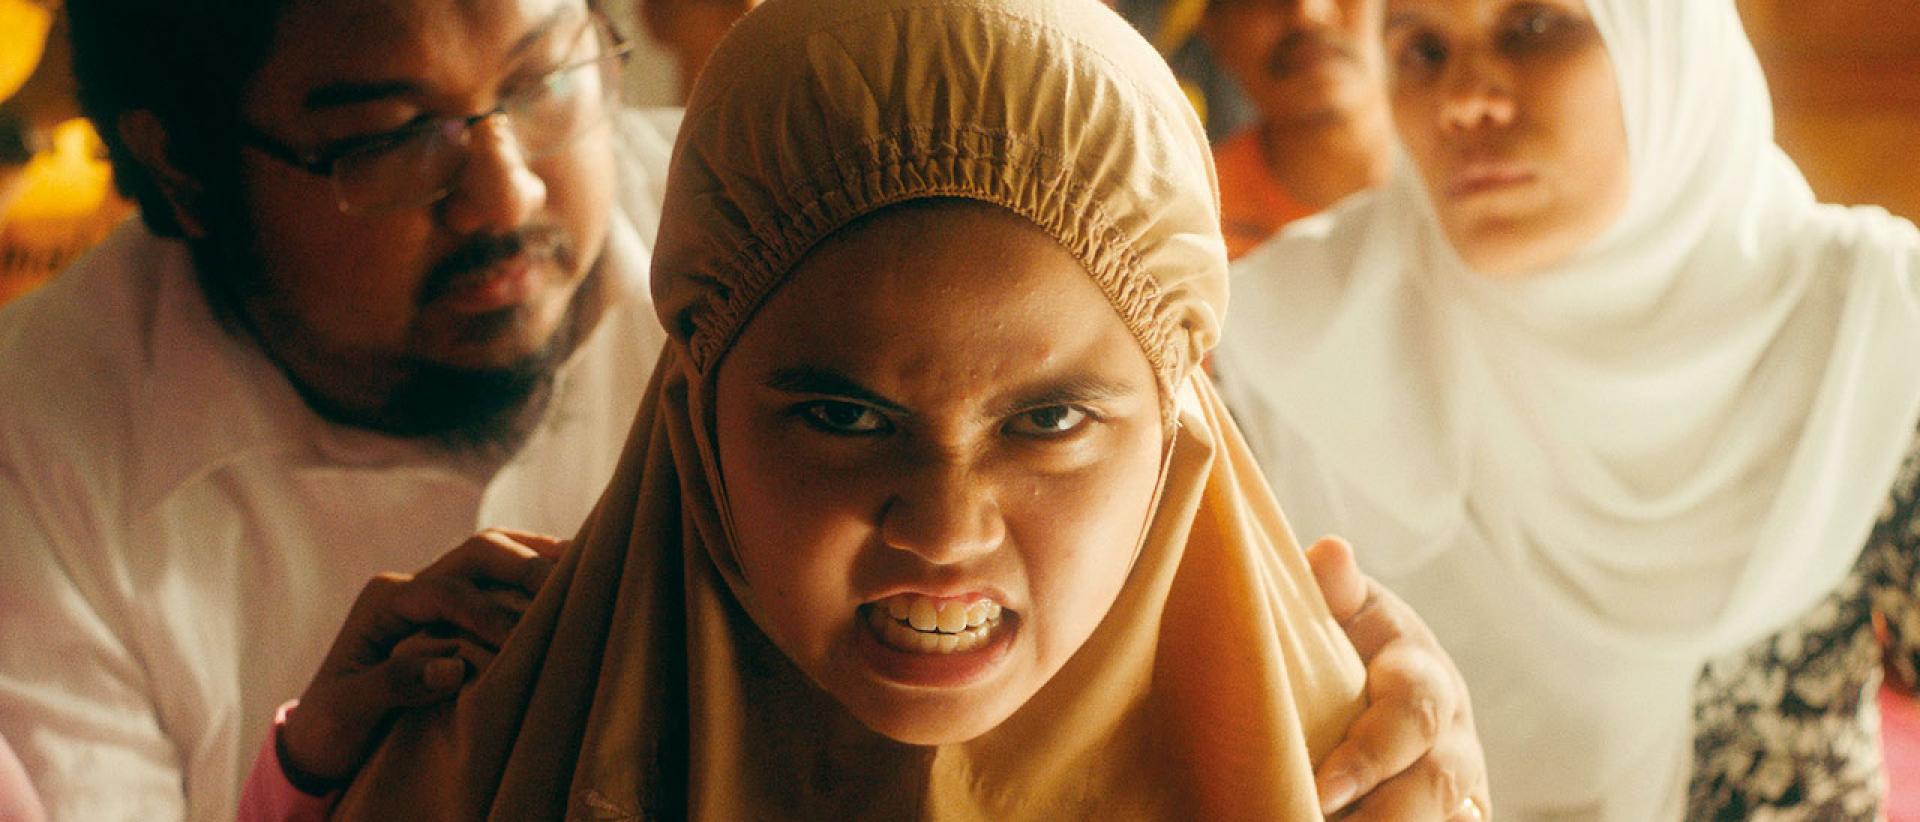 A close-up of a young girl wearing a beige, tudung-style head scarf, an intense snarl on her face. Behind her a man is holding her shoulders and beyond him other adults look on.